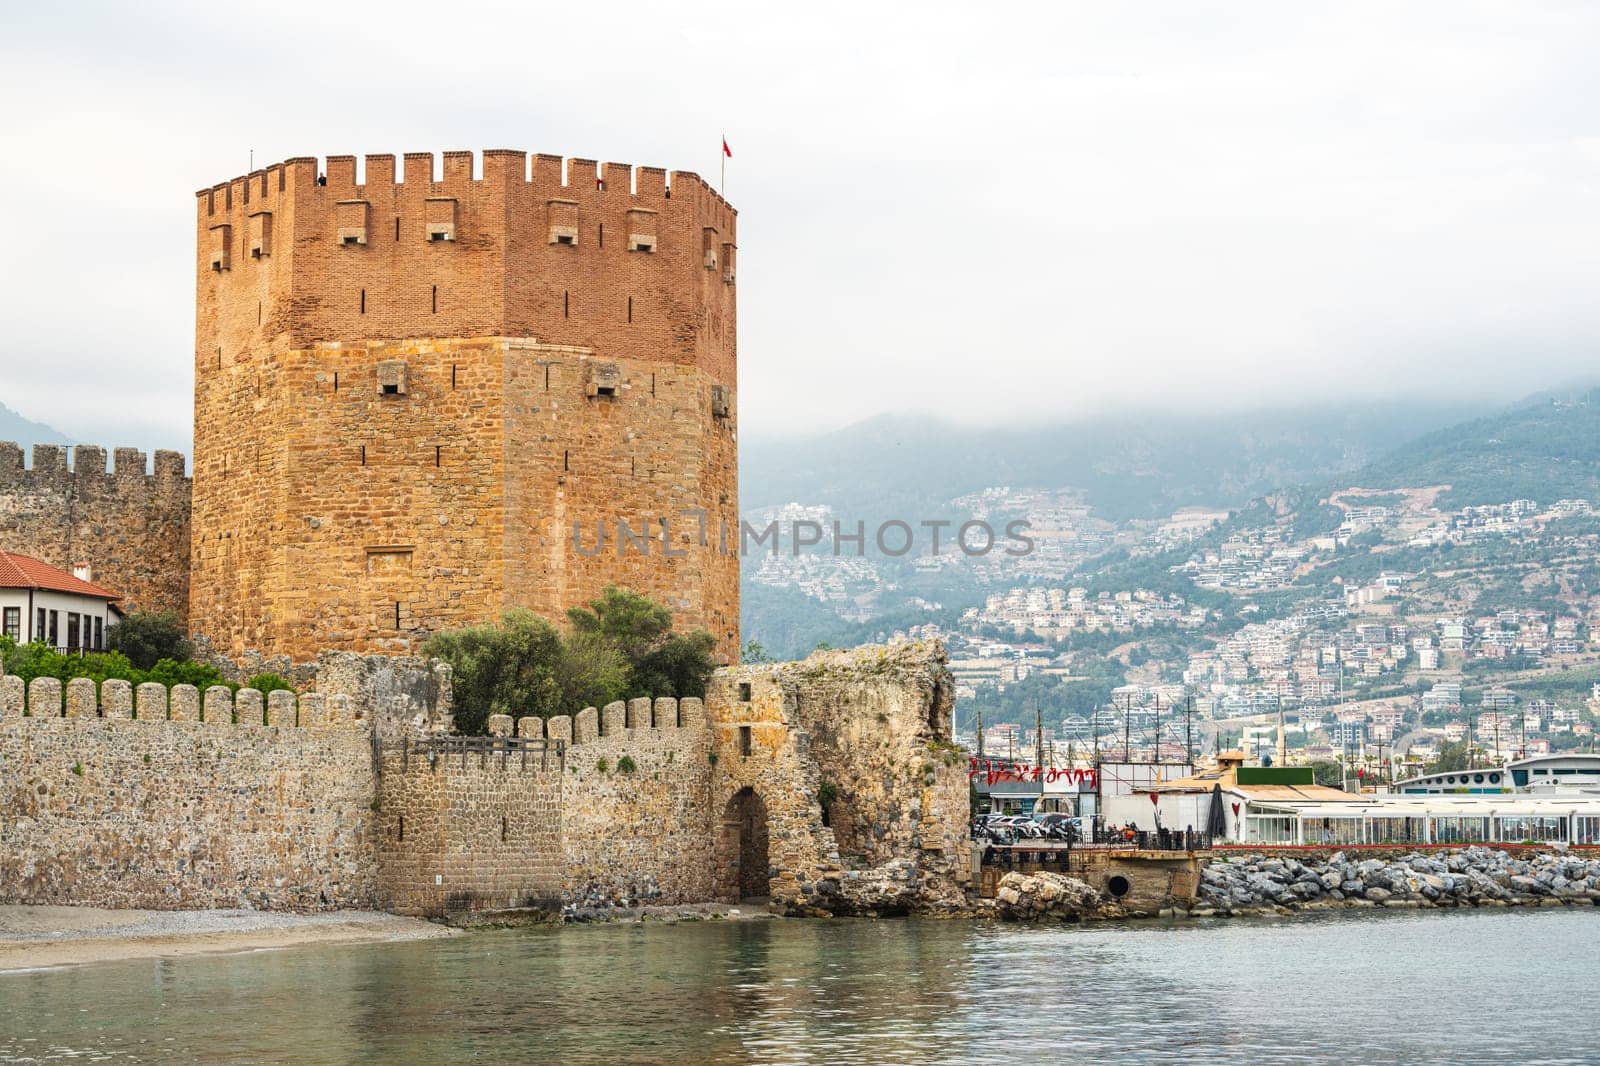 The historical Red Tower in the Alanya district of Antalya, one of the touristic regions of Turkey. Turkish name Kizil Kule